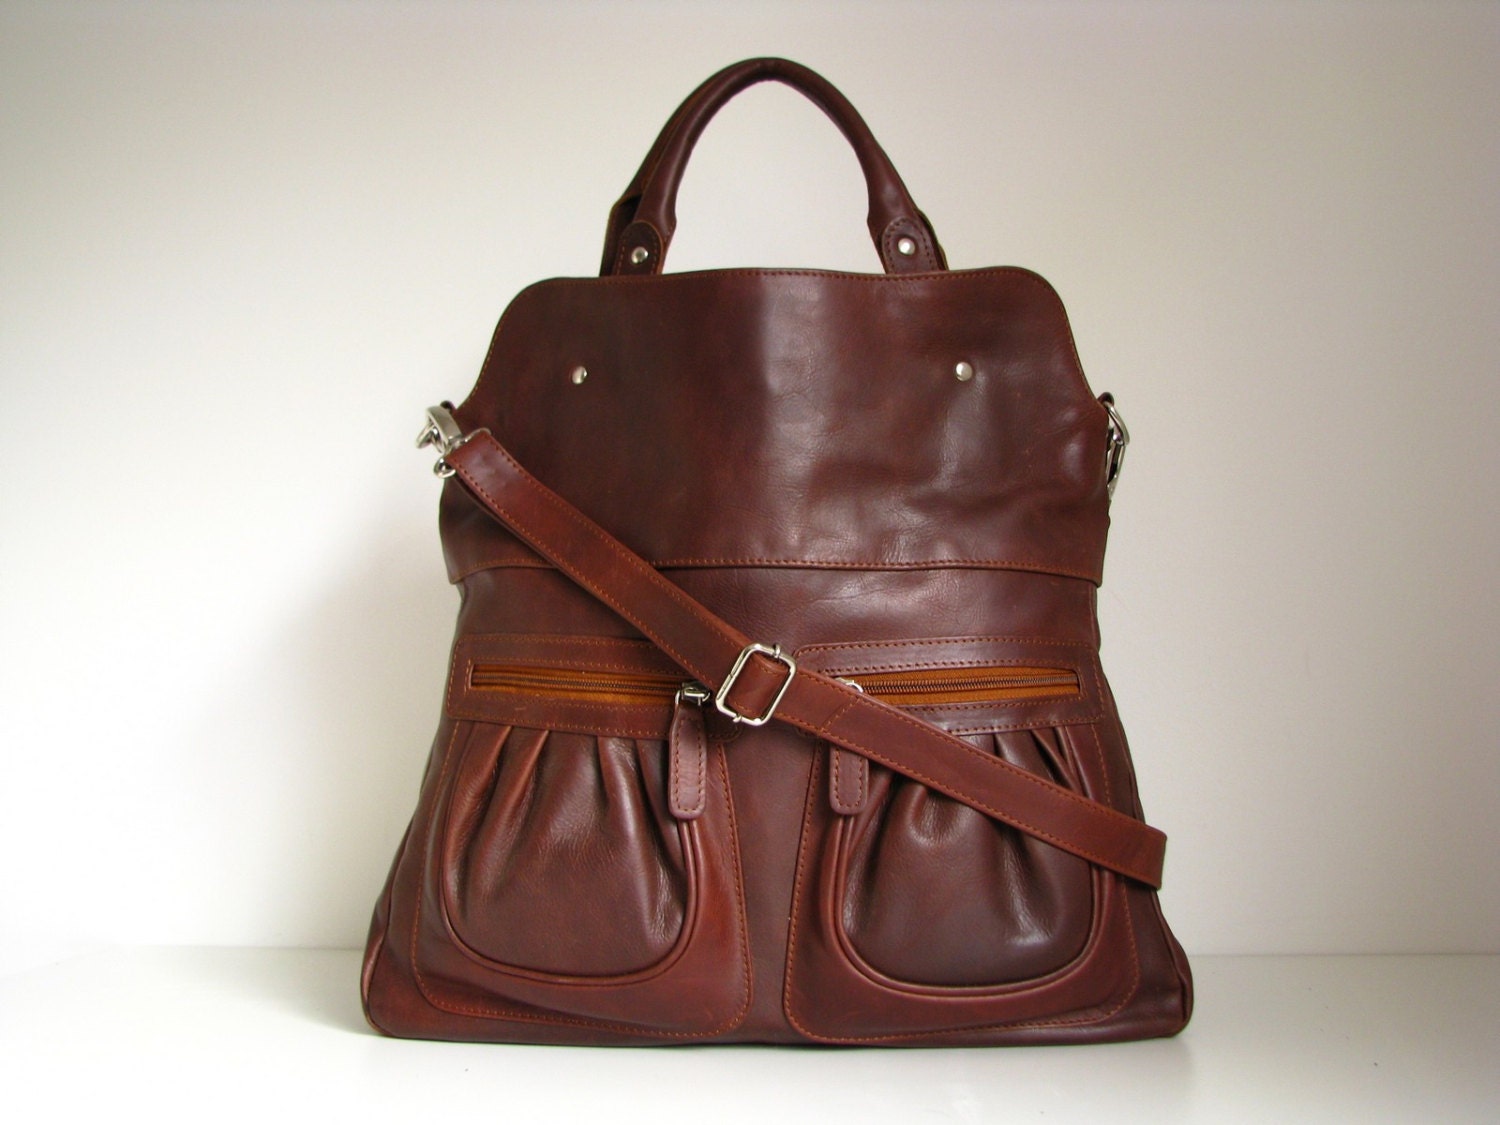 Leather Handbag Tote in Vintage Brown by TheLeatherStore on Etsy